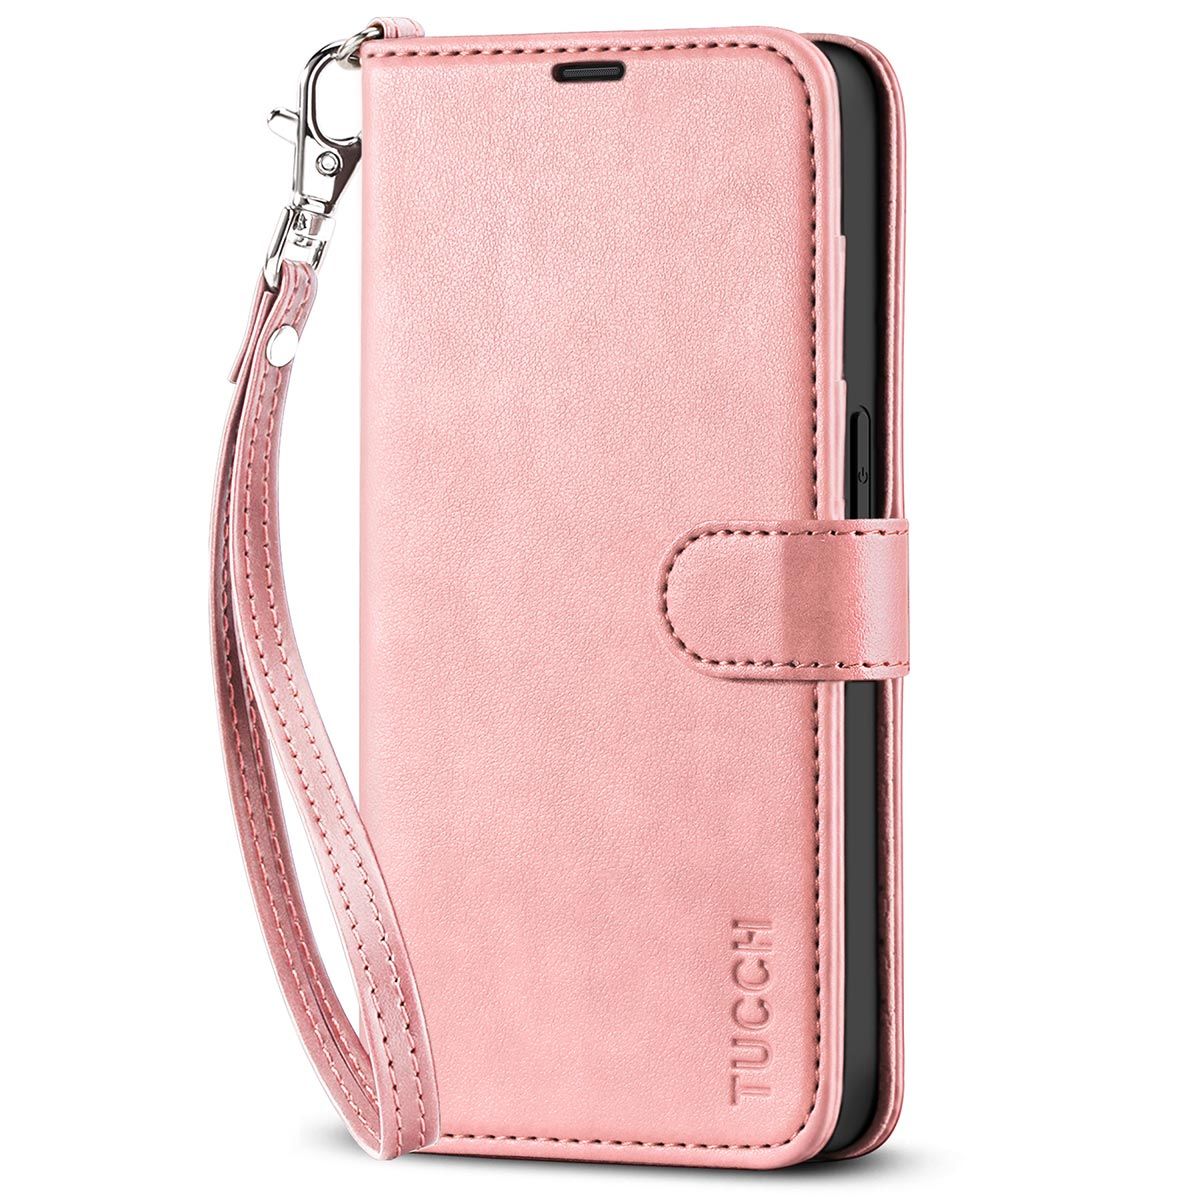 Apple iPhone 12 Mini Wallet Case - RFID Blocking Leather Folio Phone Pouch  - CarryALL Series